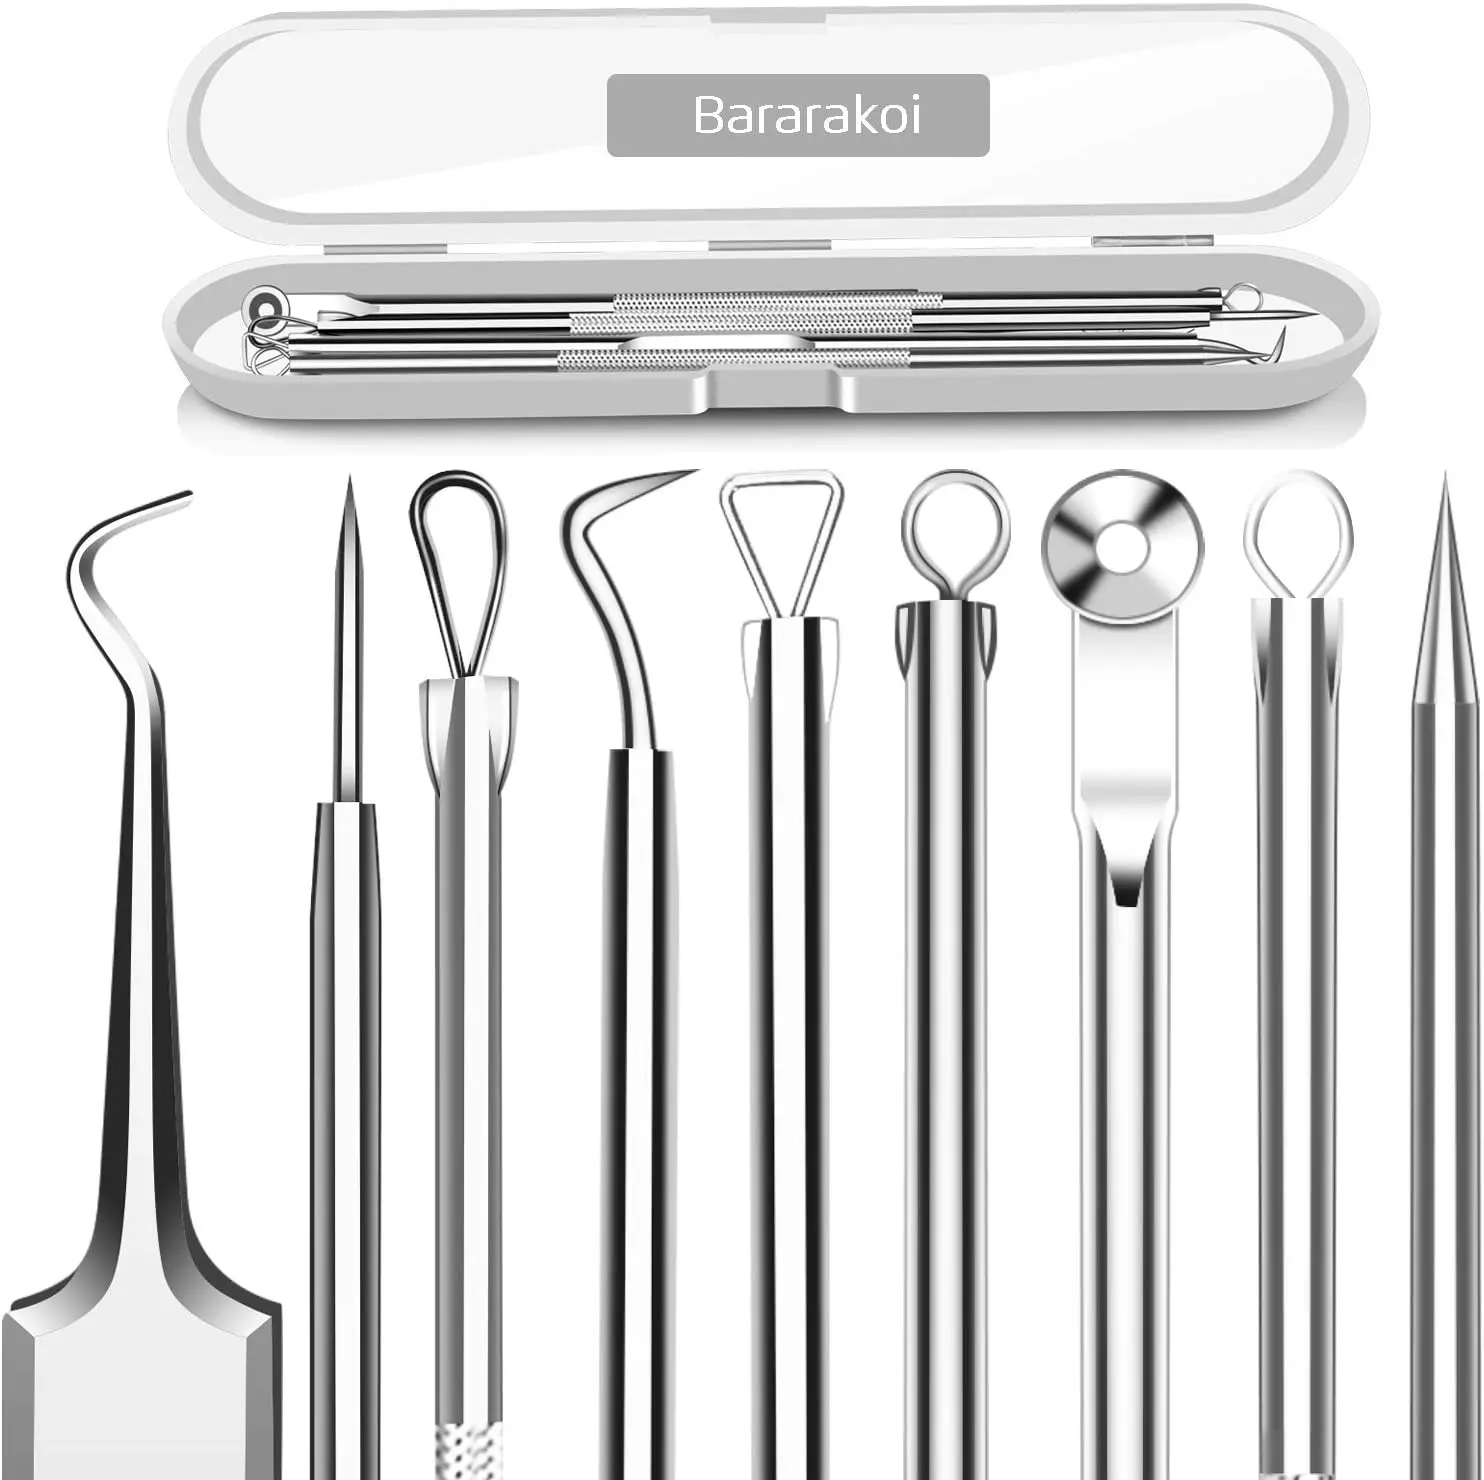 

5PCS Blackhead Remover Comedone Extractor, Curved Blackhead Tweezers Kit, Professional Stainless Pimple Acne Blemish Removal